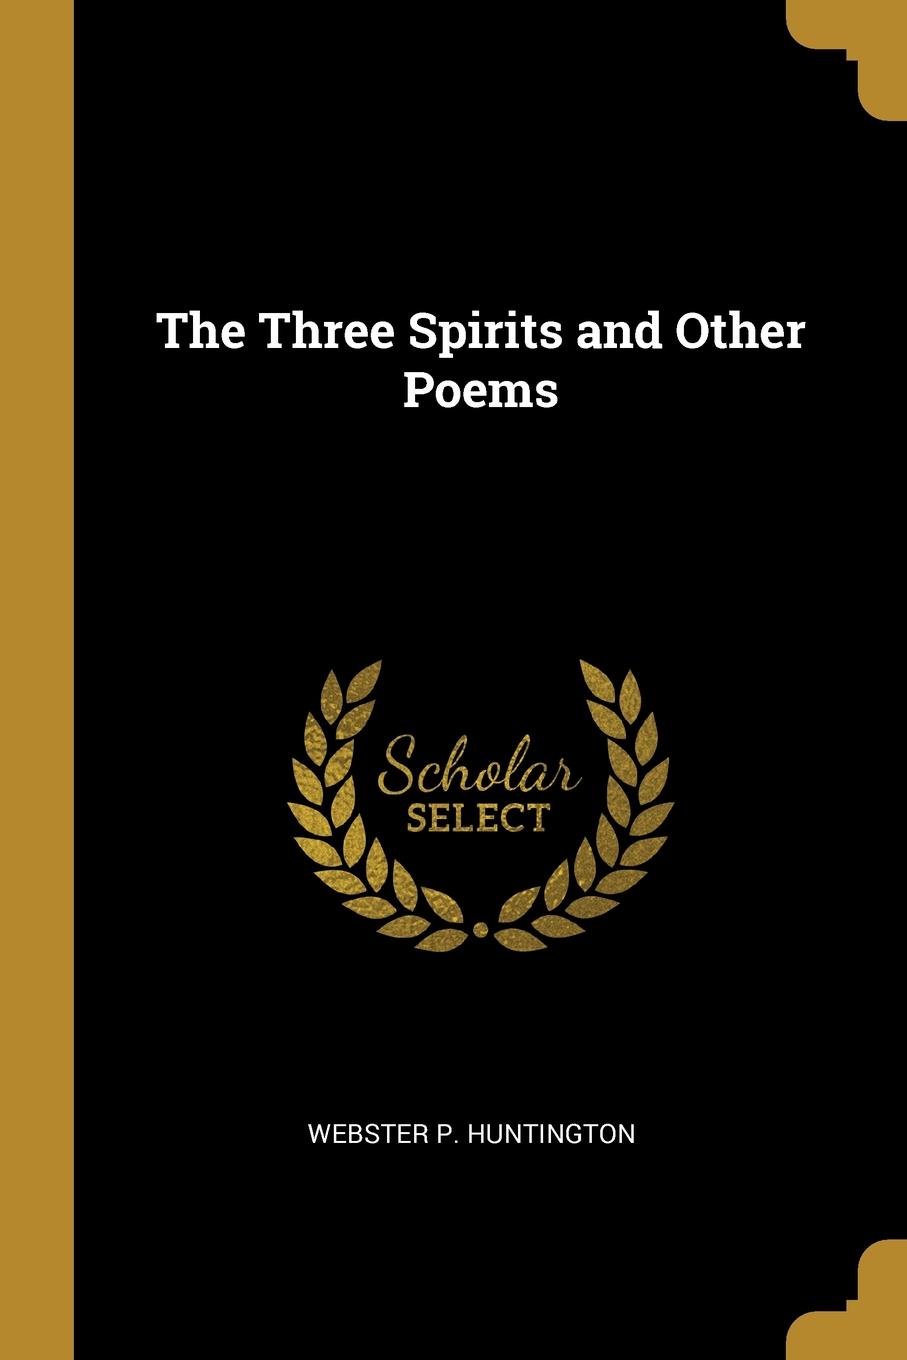 The Three Spirits and Other Poems